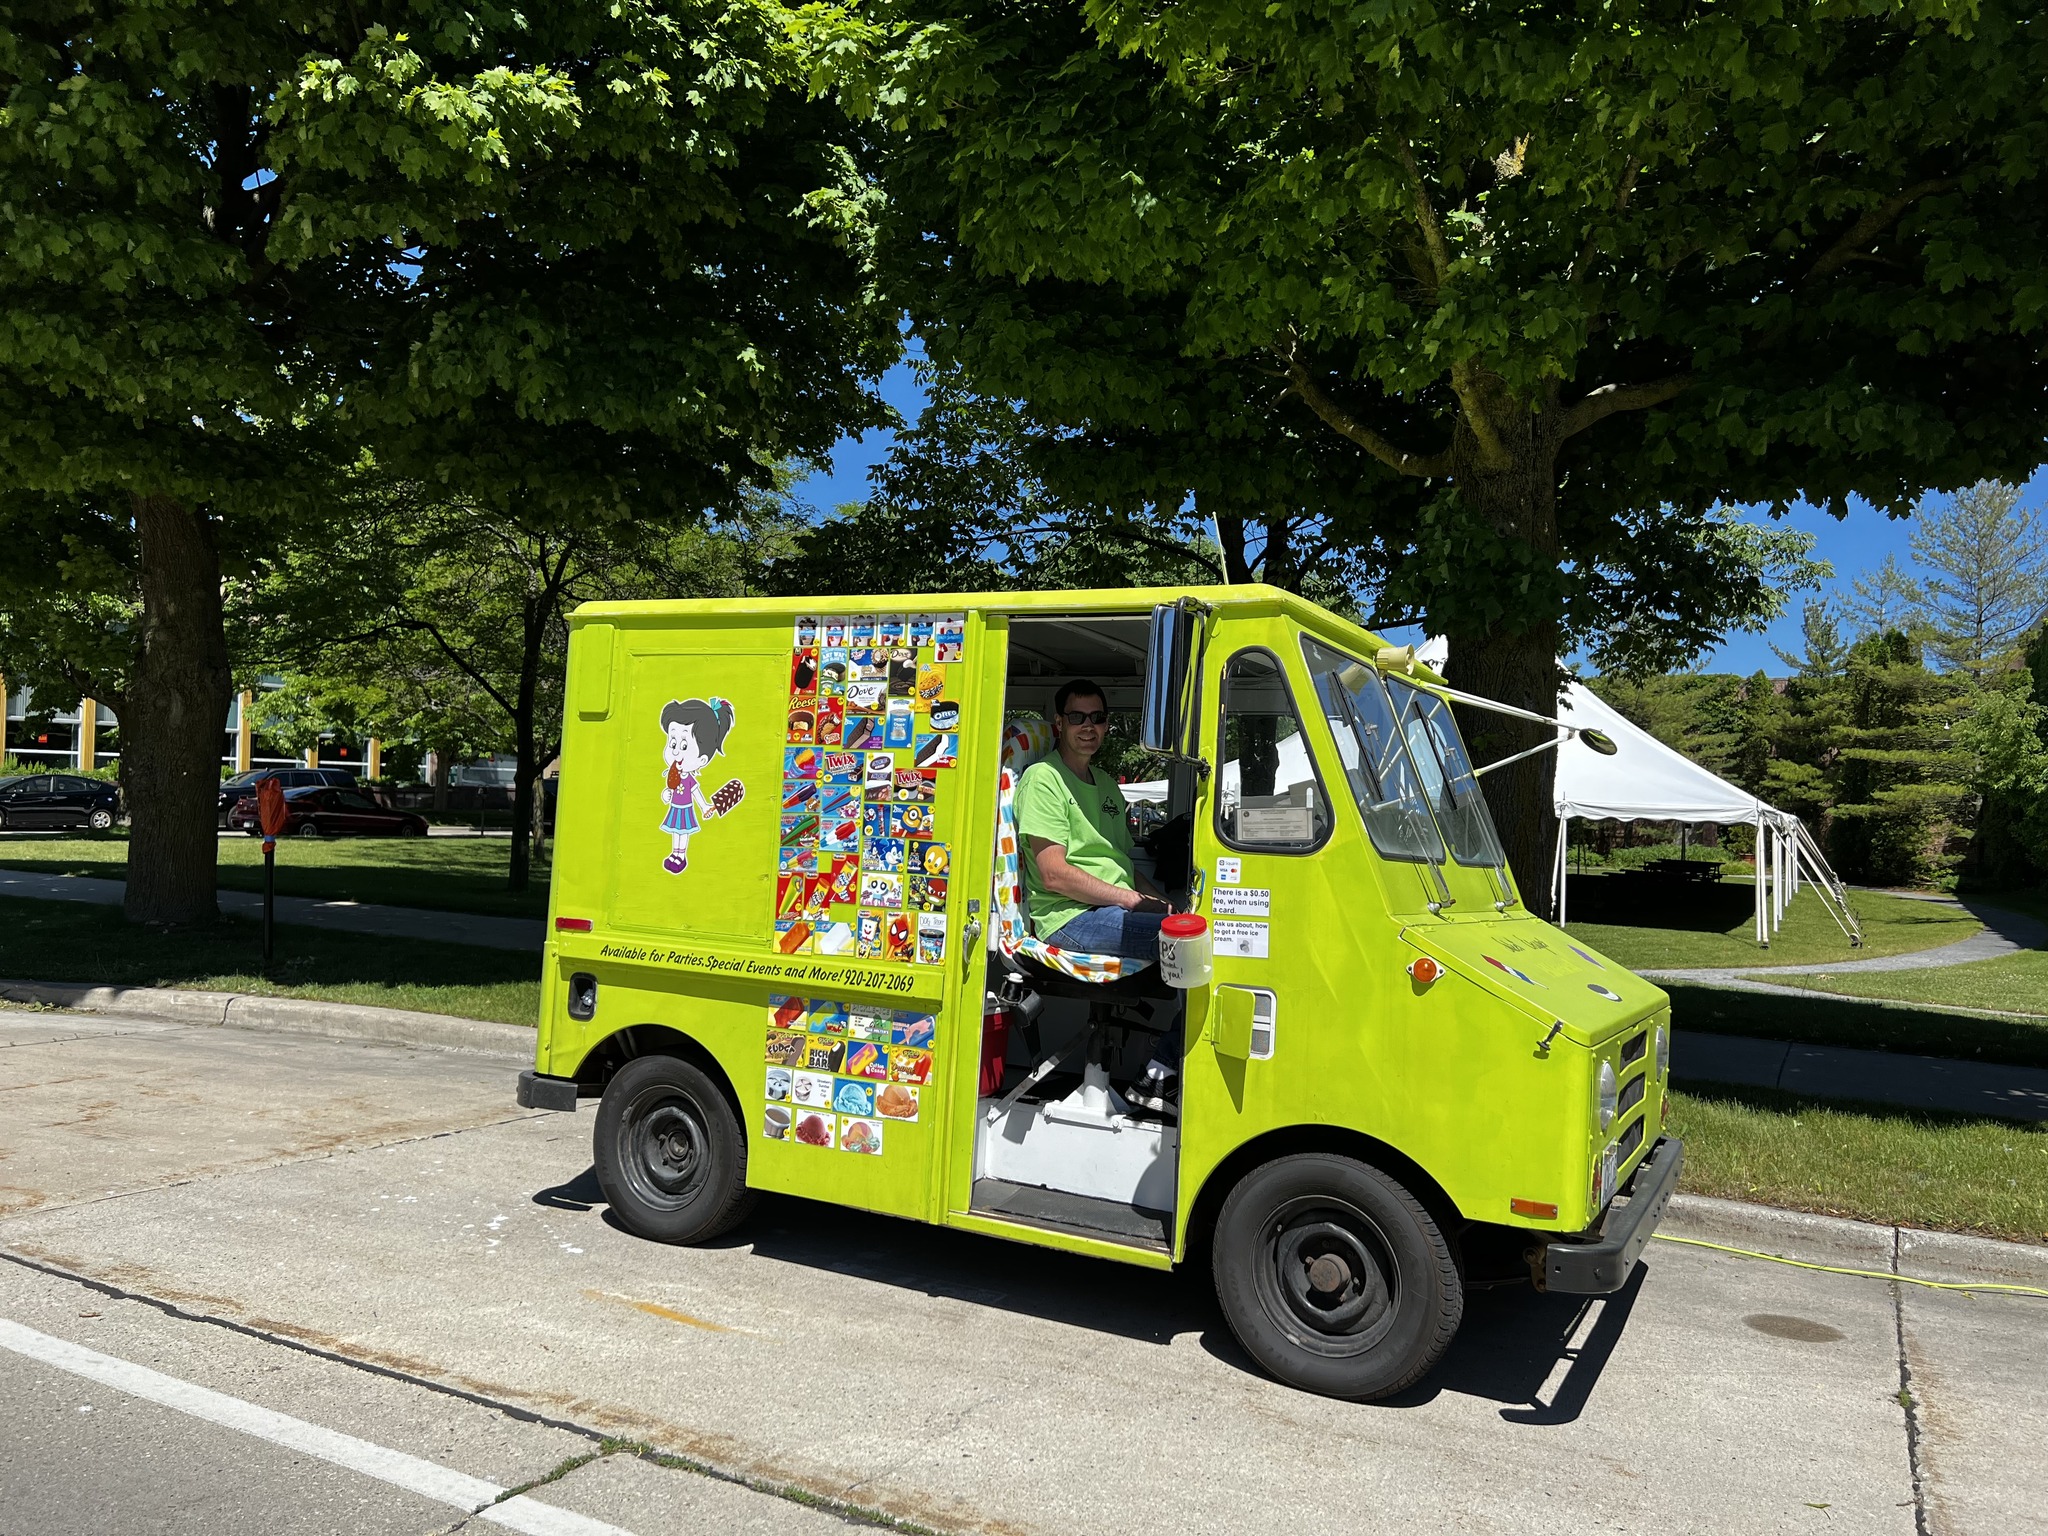 Small ice cream truck at an event